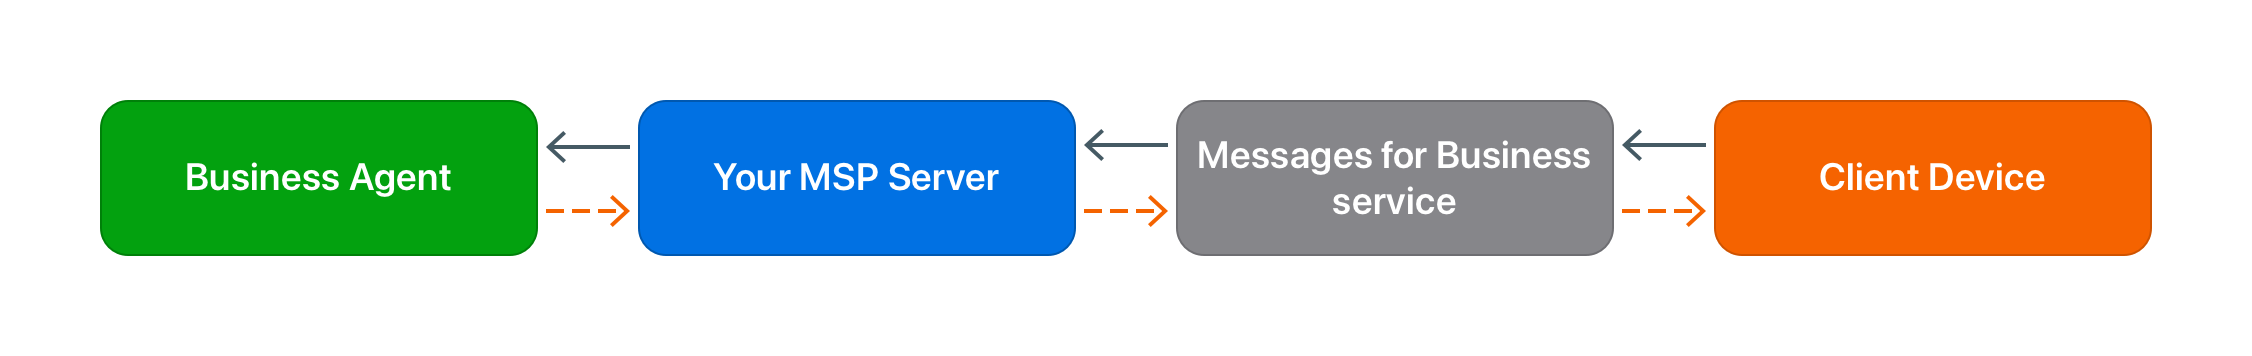 Messages for Business service flow